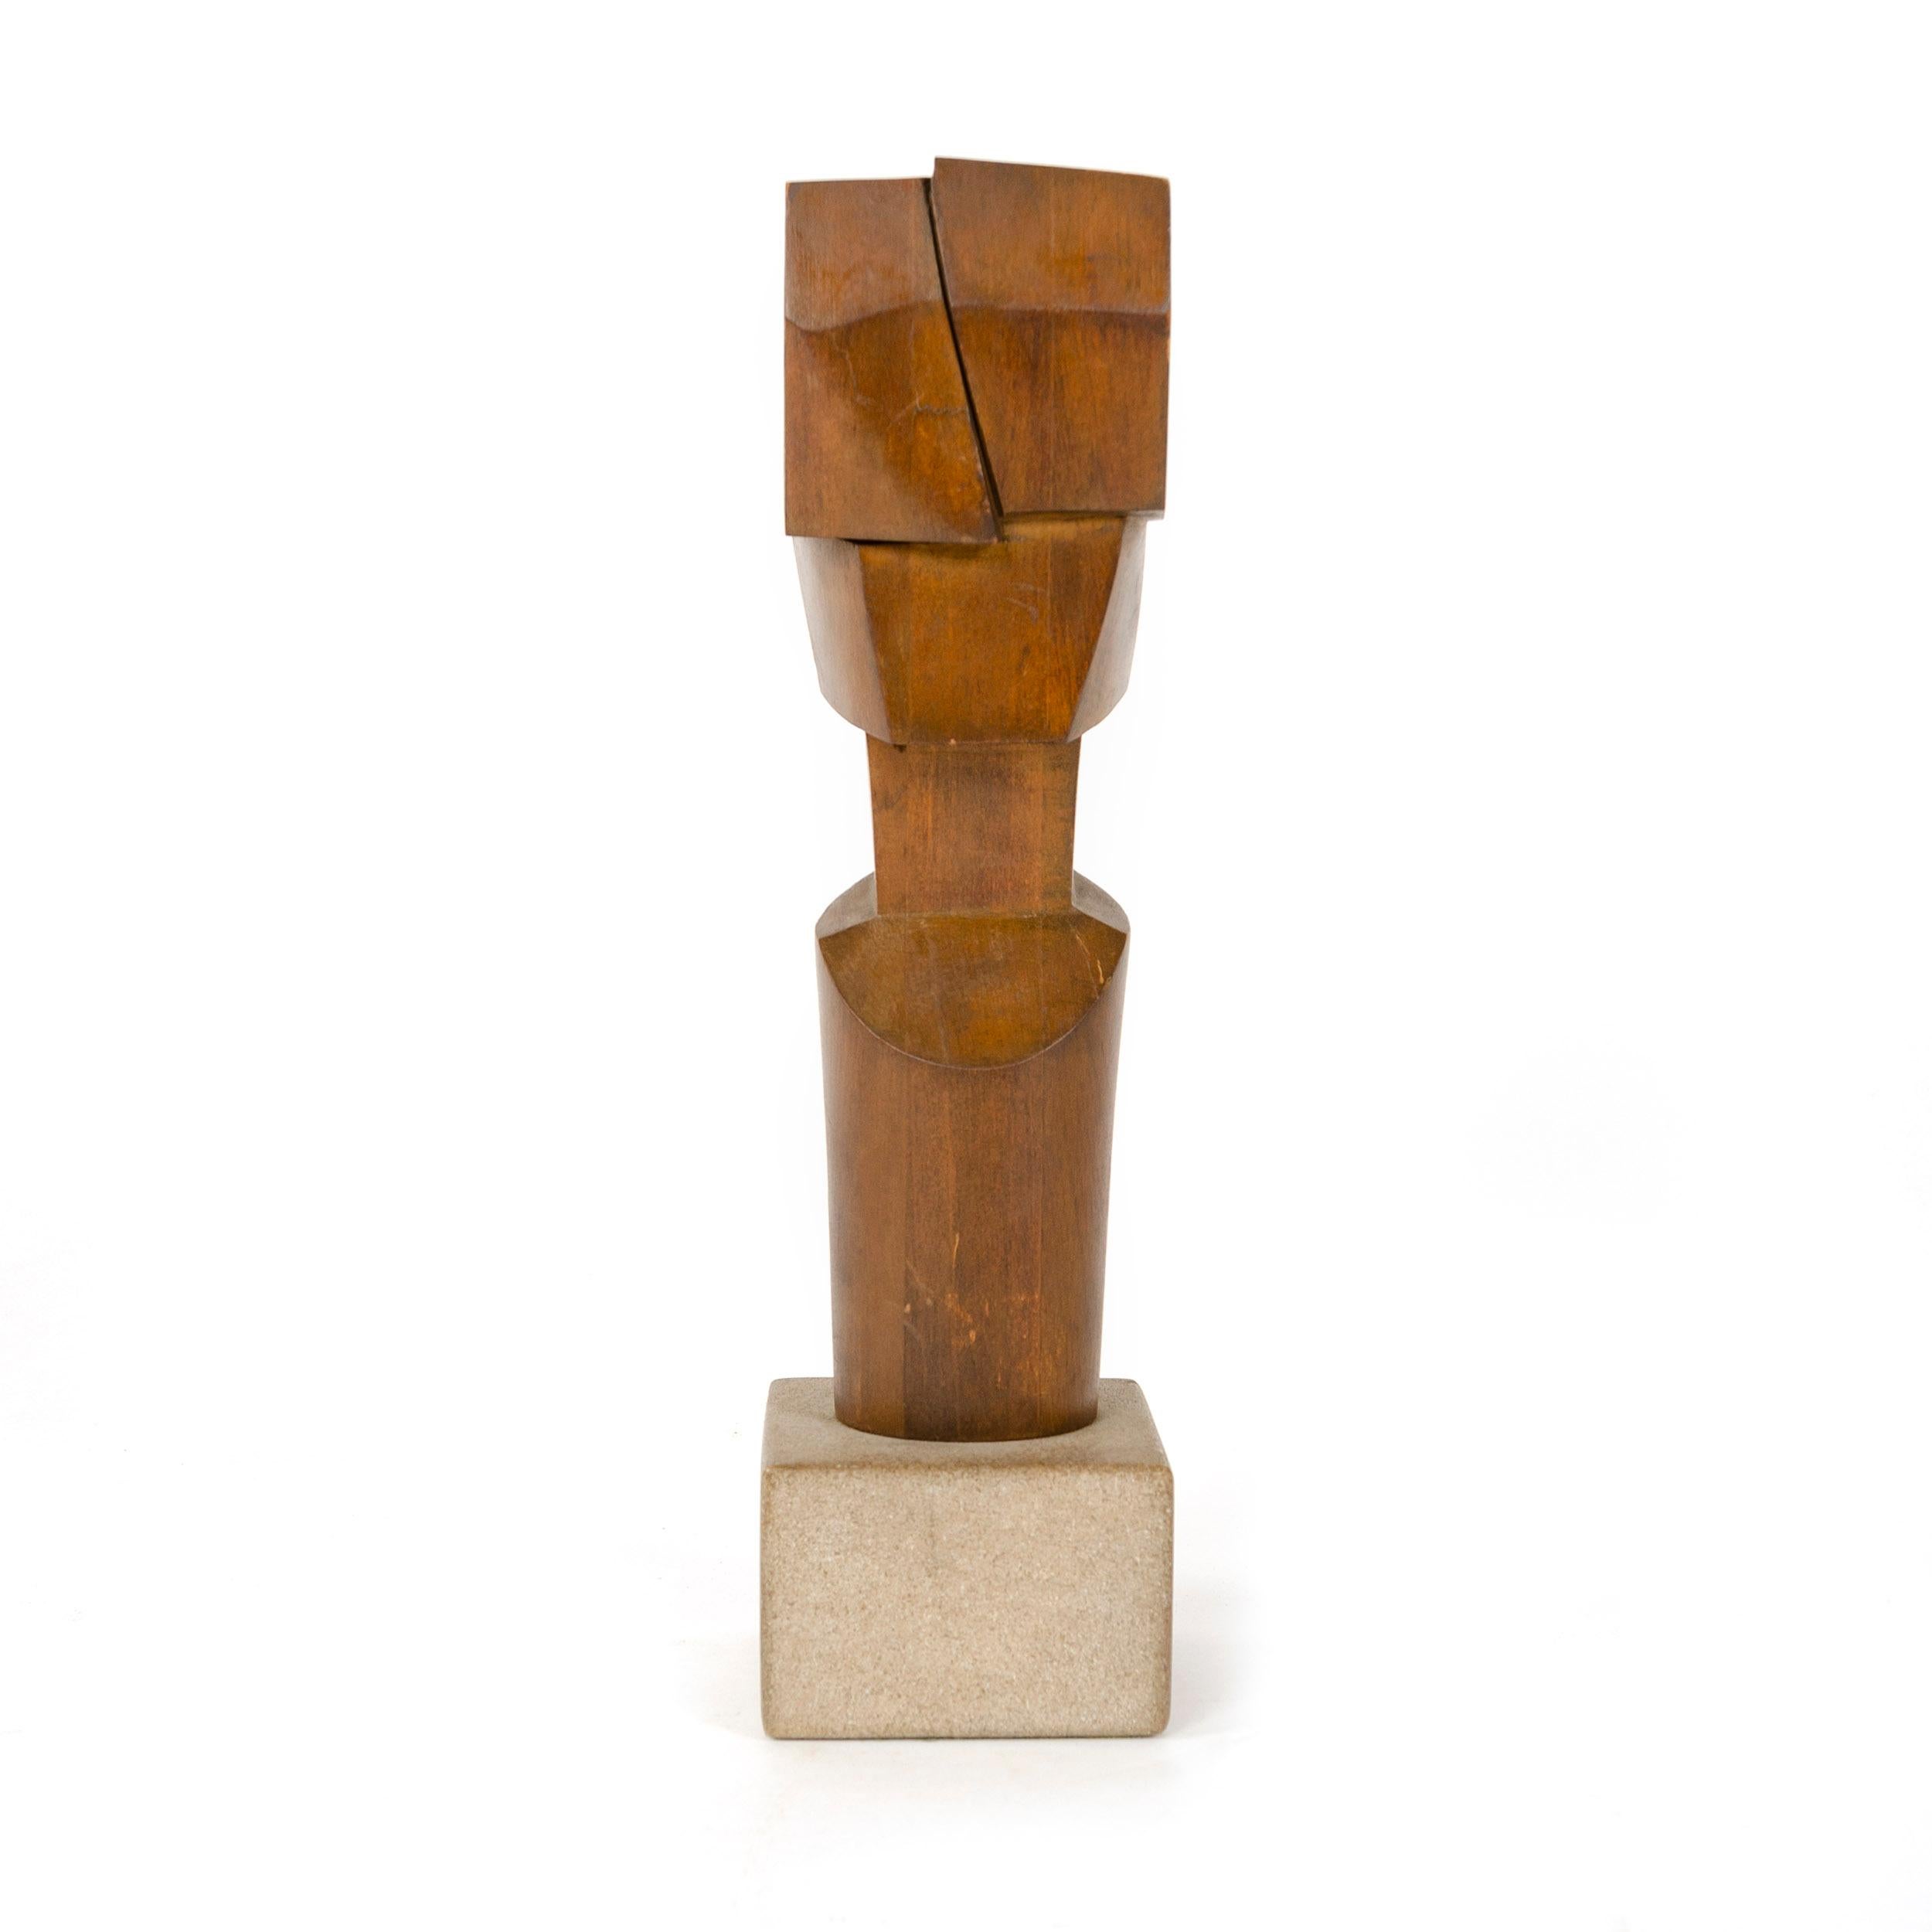 A modernist pine sculptural bust in the manner of Cubism, set upon a concrete cube base. Signed 'W. Sildar'.
       